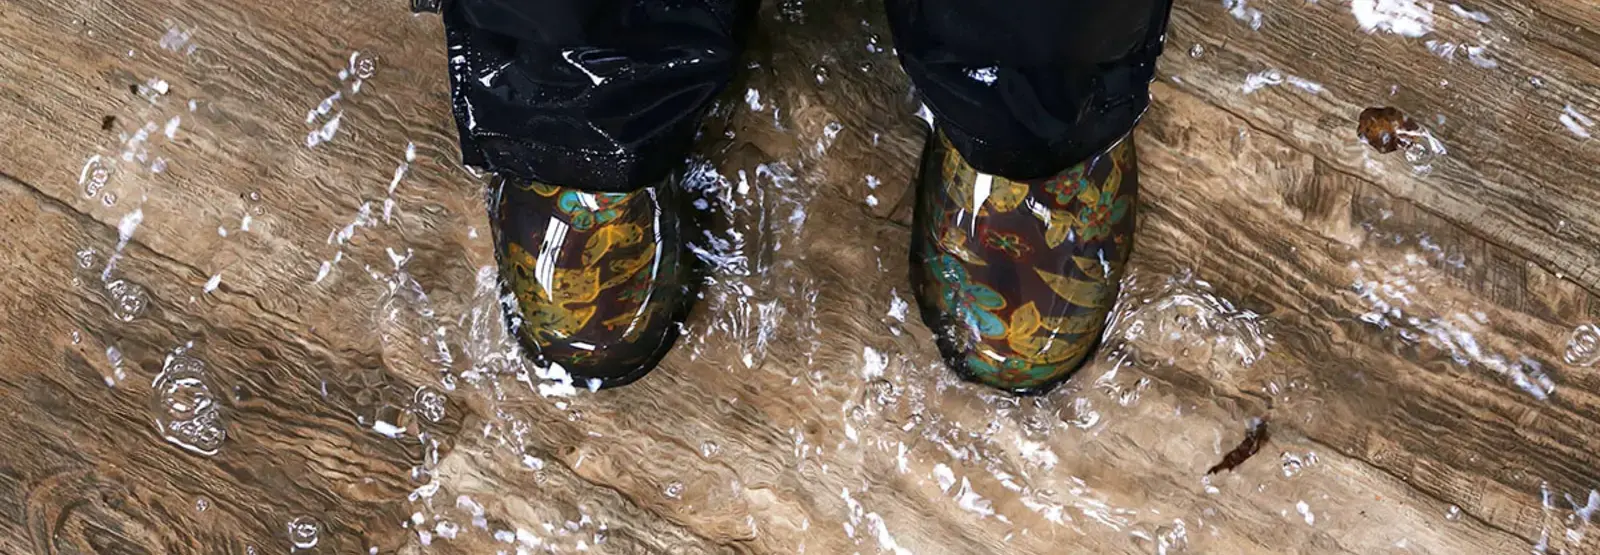 Person in boots stands on a wood floor covered in water.